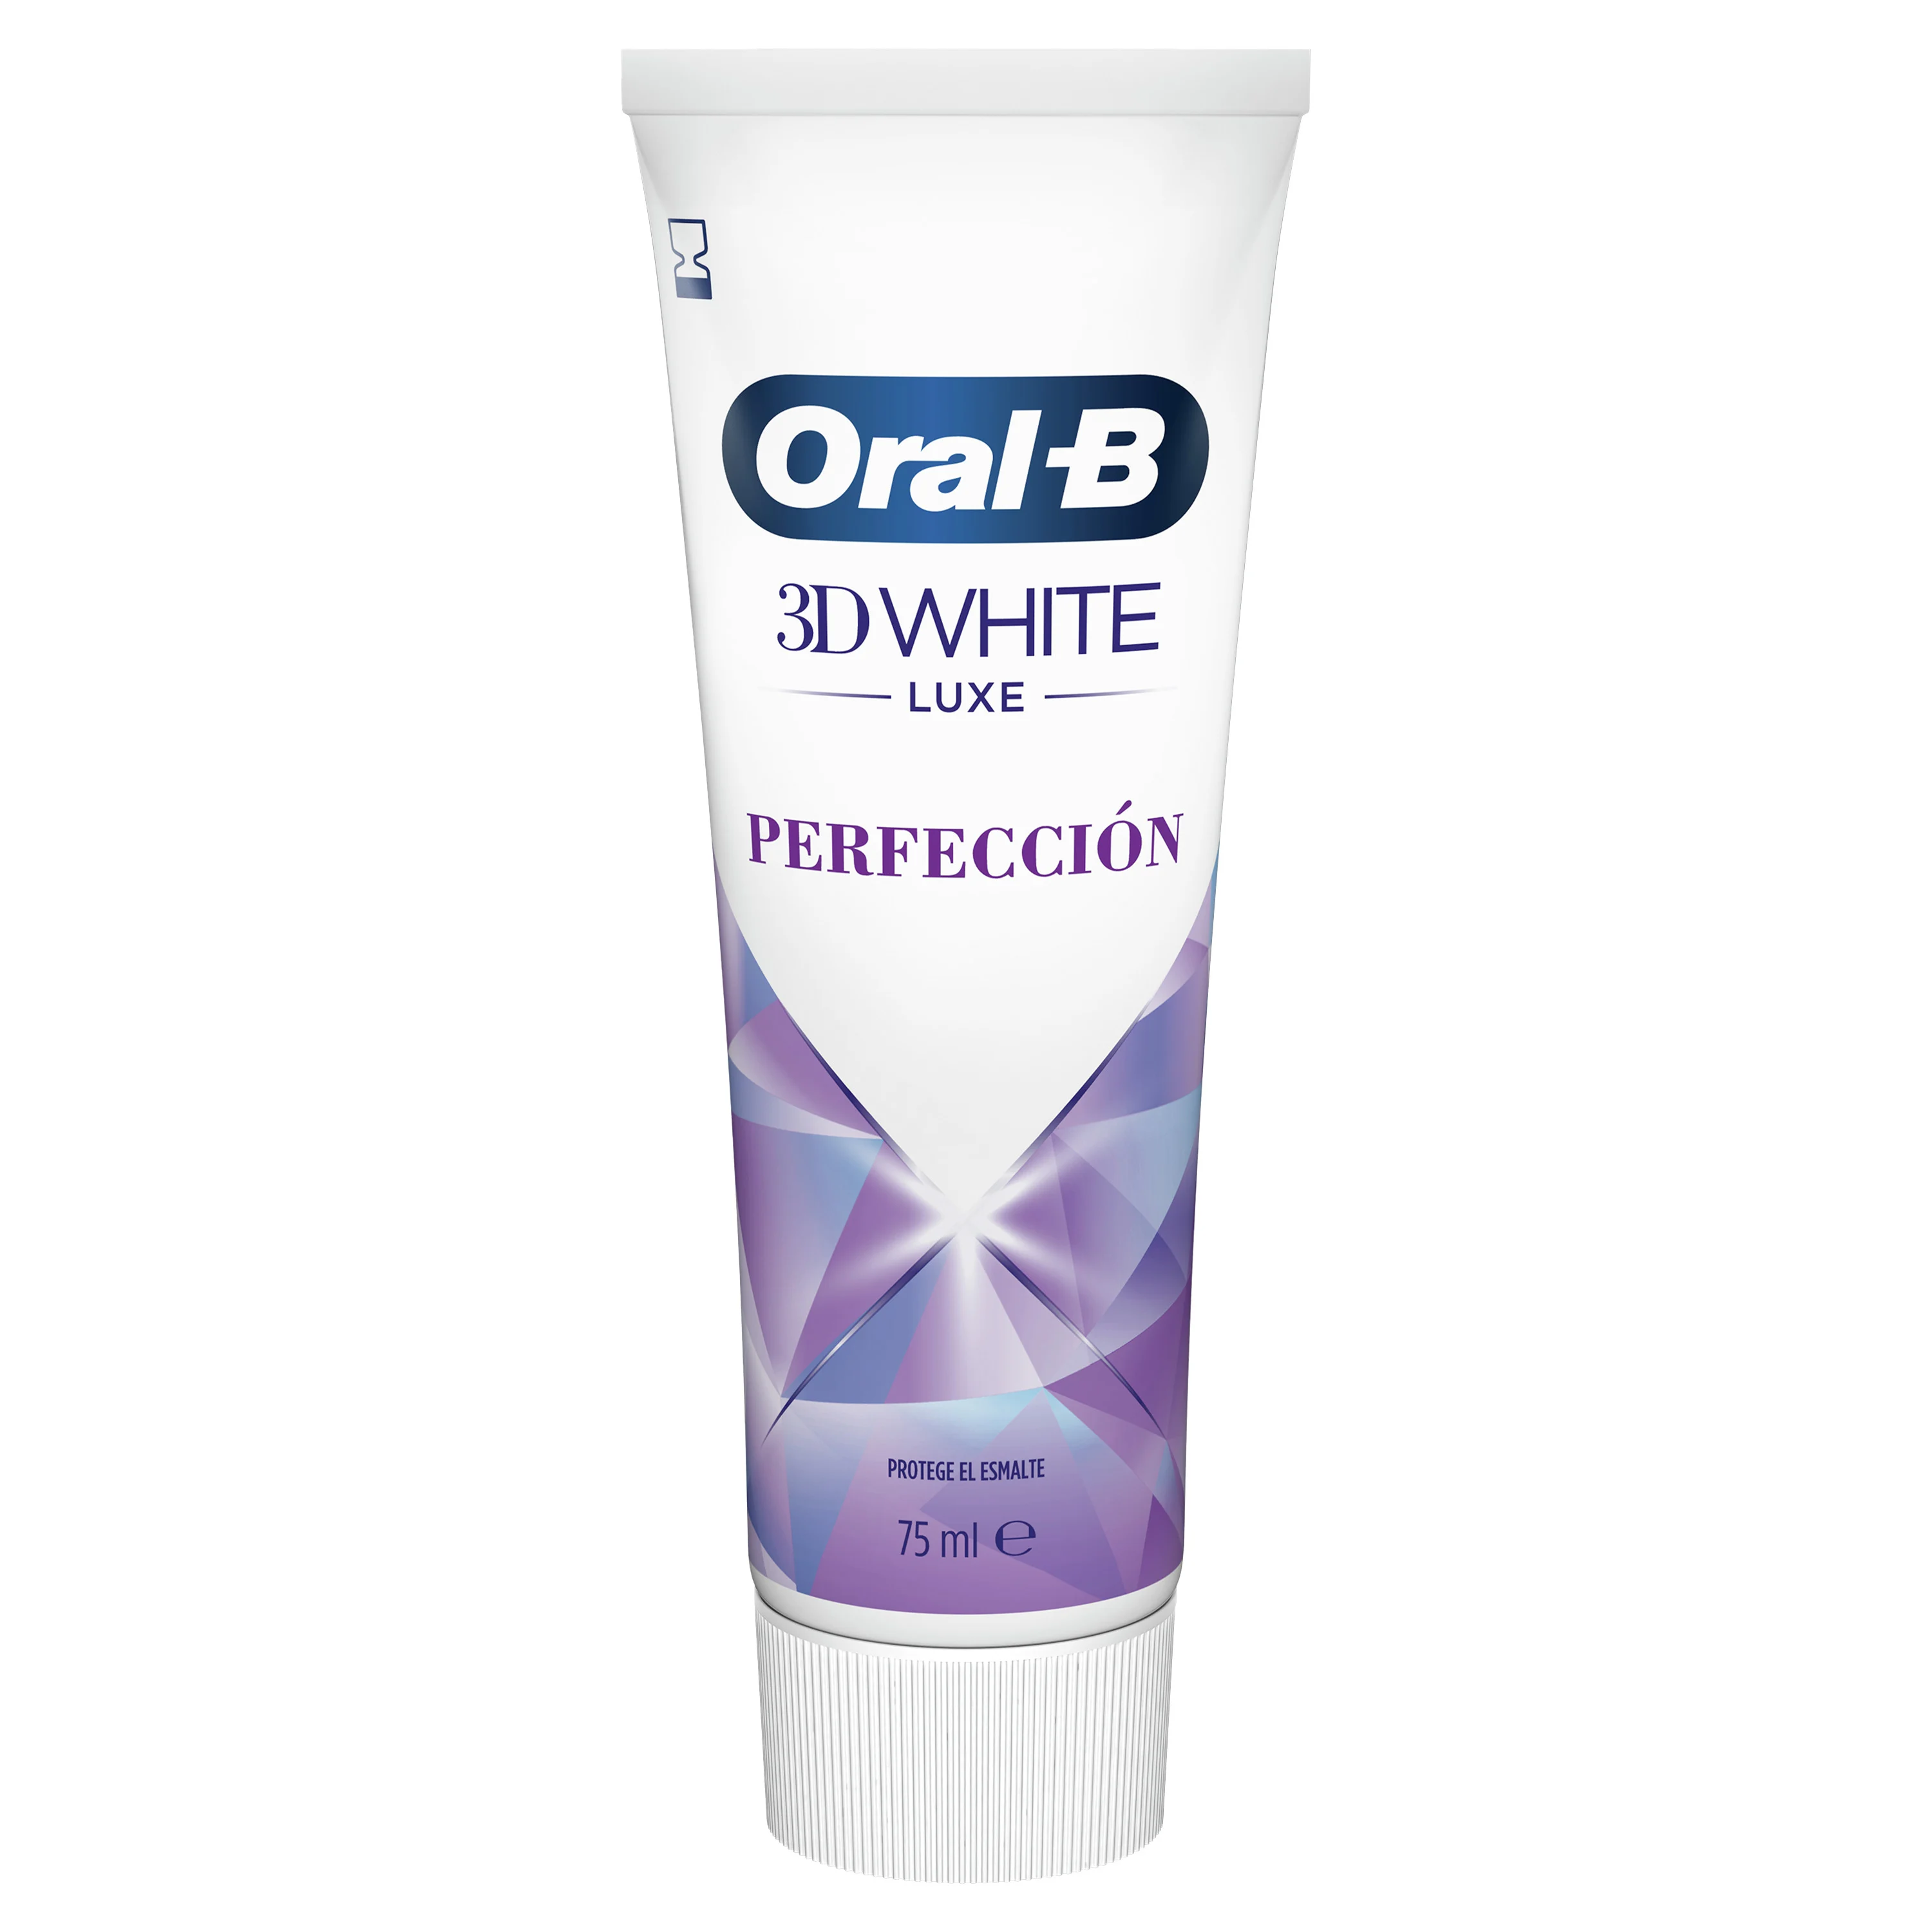 Oral-B 3DWhite Luxe Perfection Pasta Dentífrica 